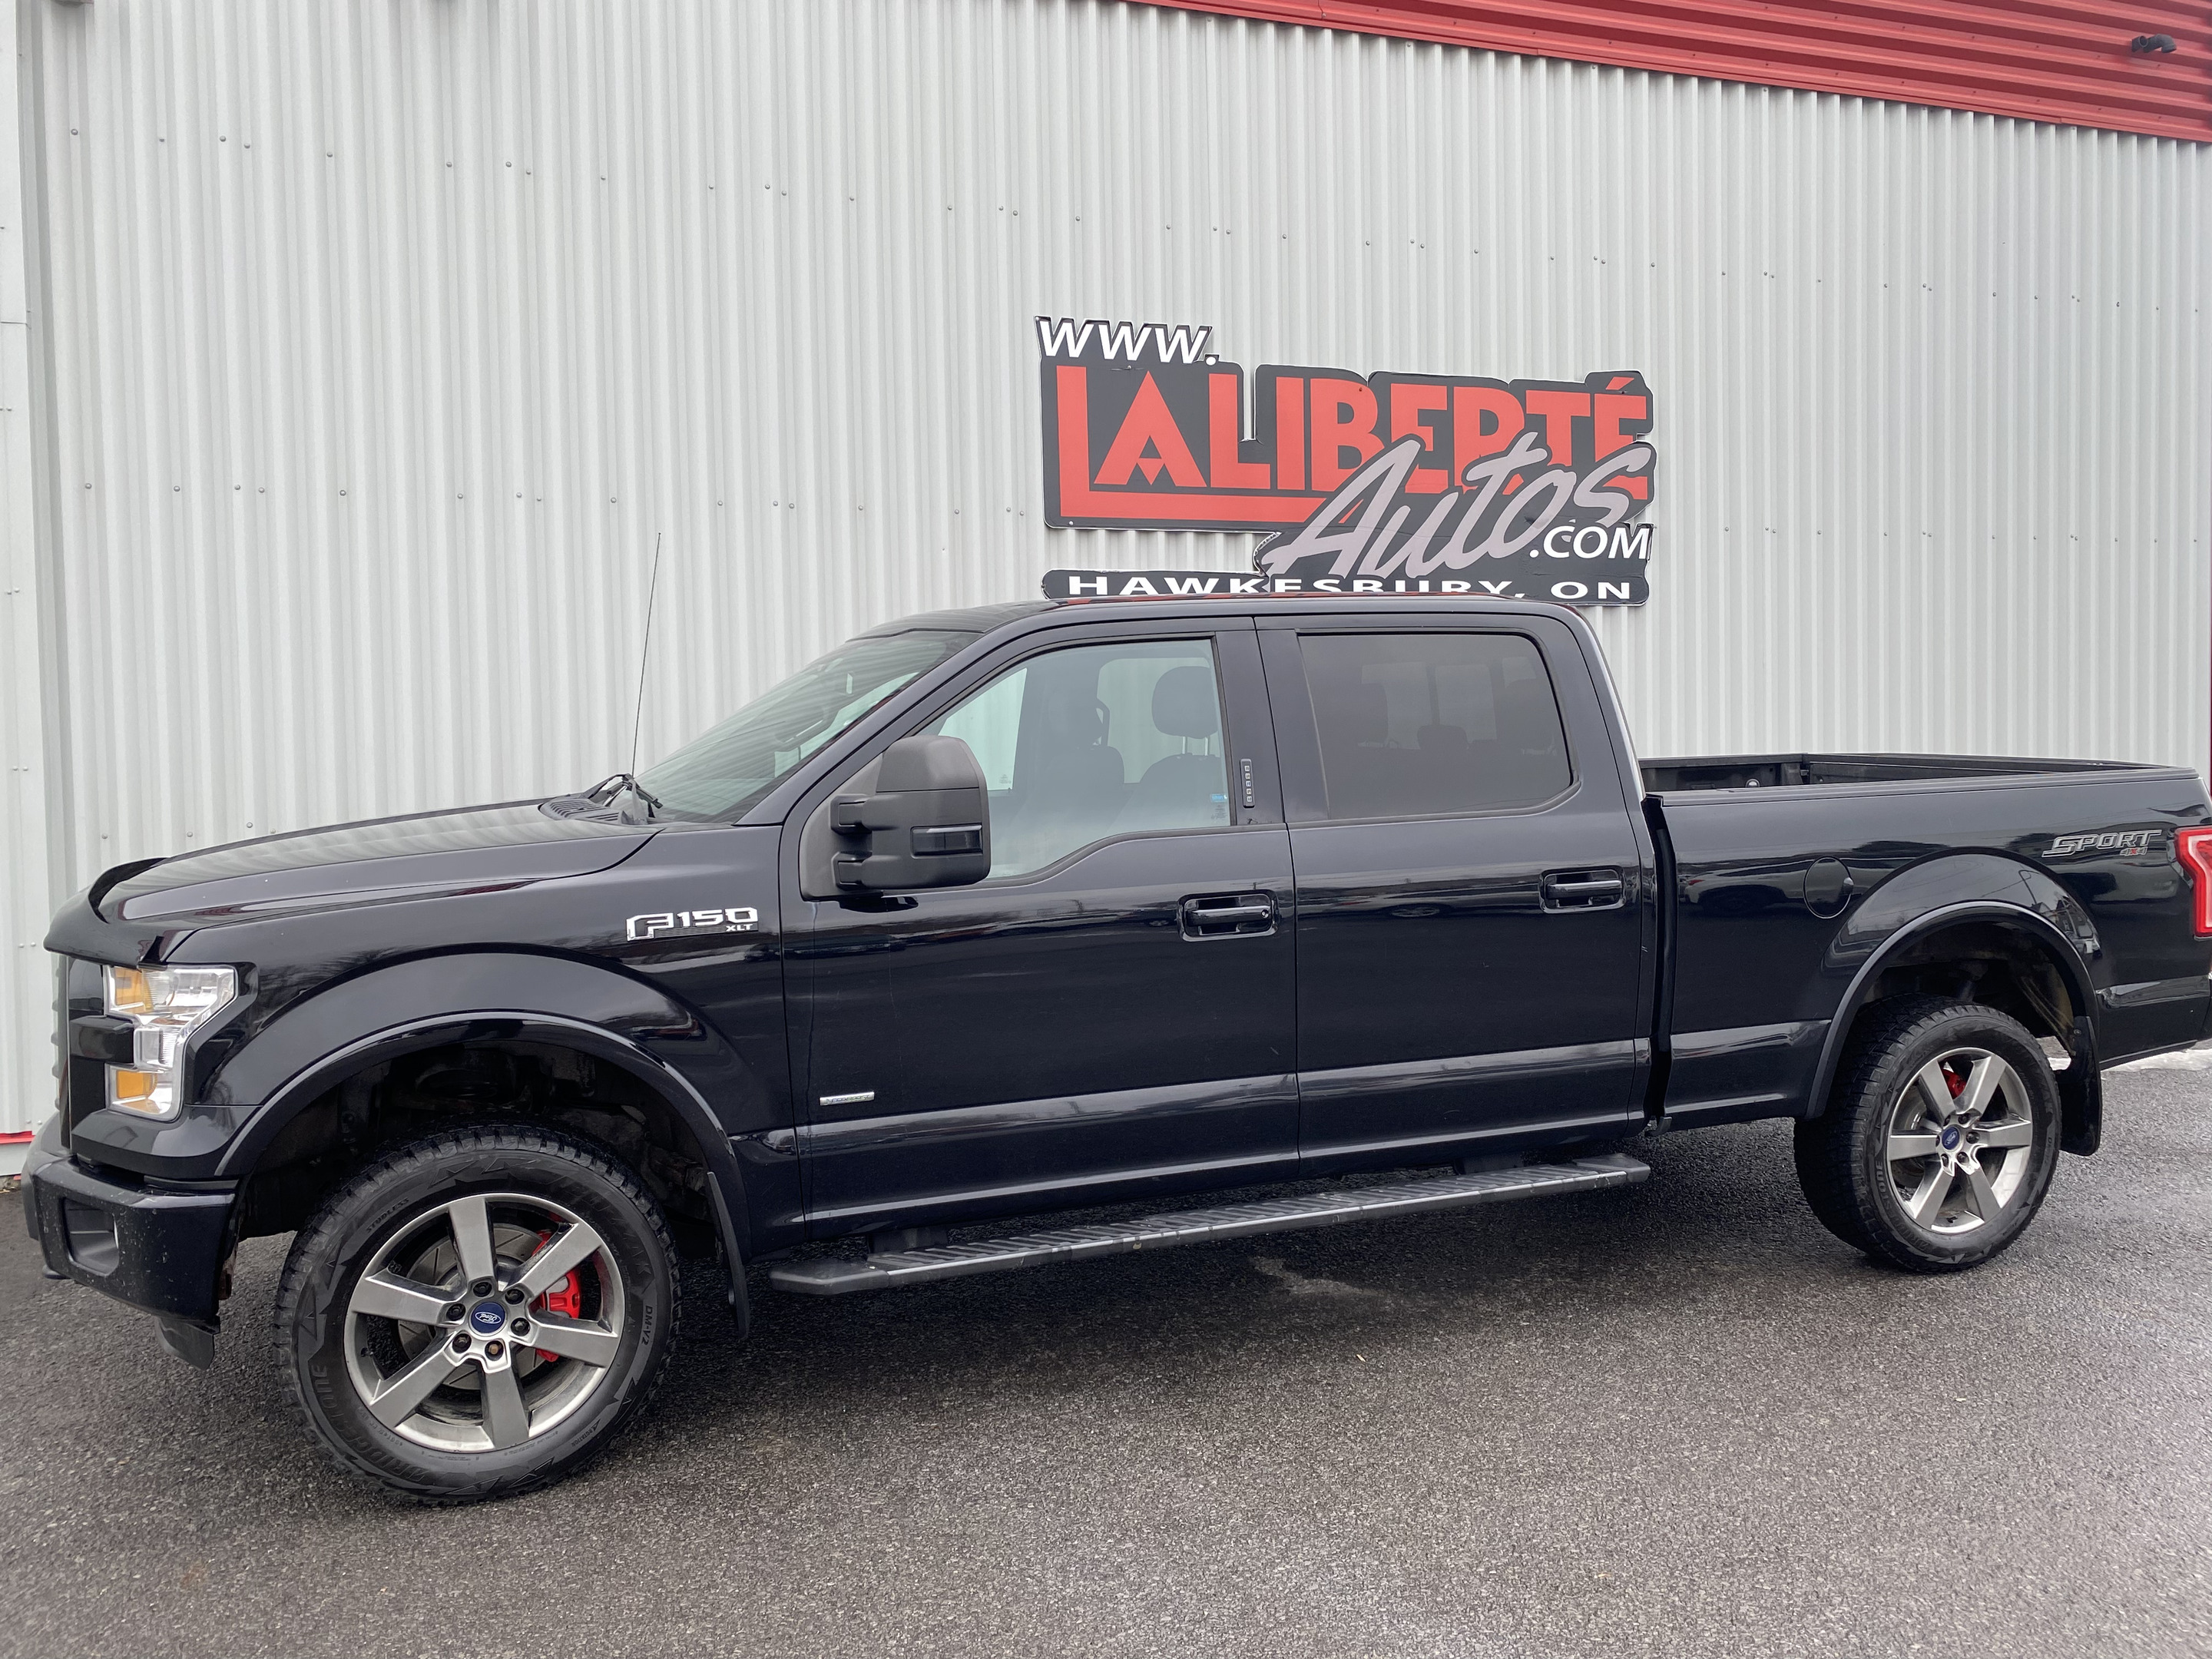 2016 Ford F-150 XLT SuperCrew 6.5-ft. Bed 4WD